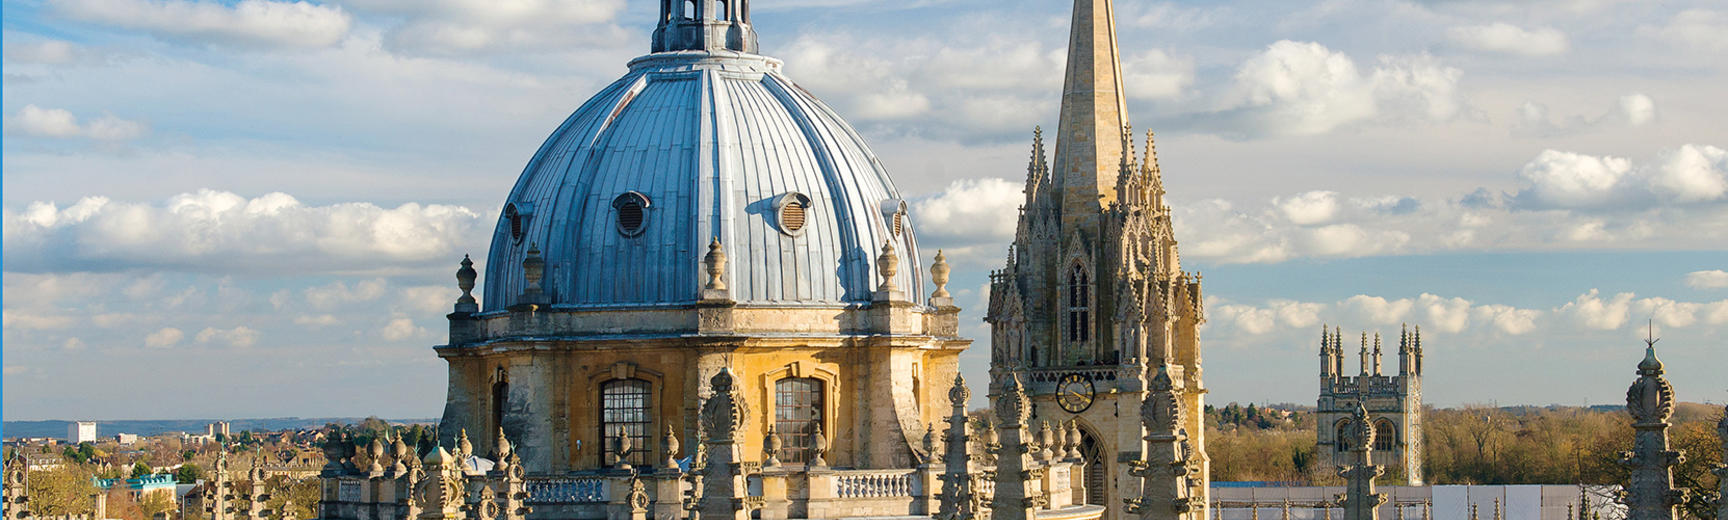 View of Radcliffe Camera skyline